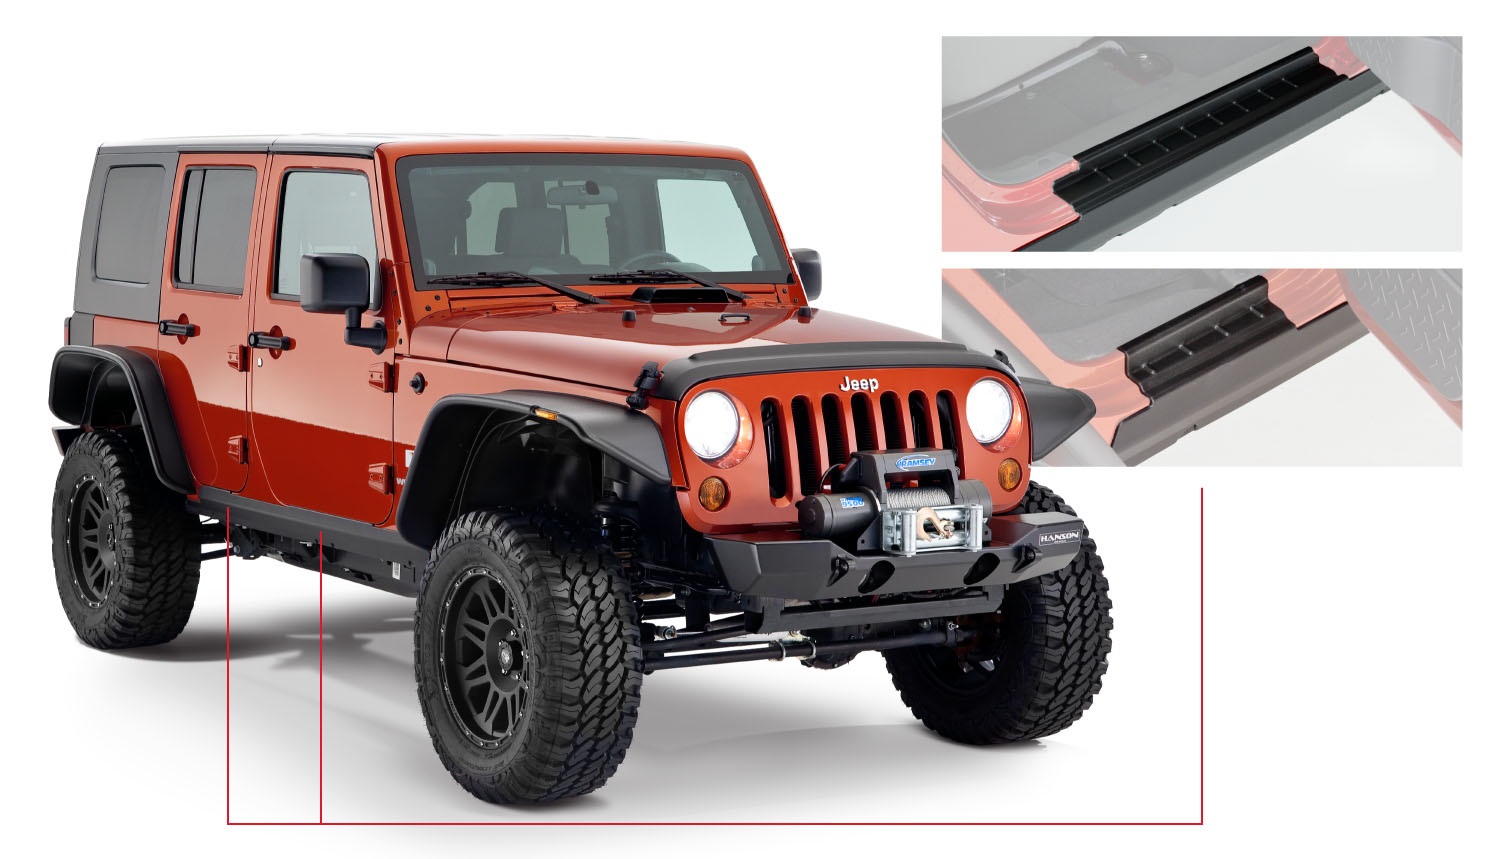 Bushwacker 14012 Black Trail Armor Rocker Panel and Sill Plate Covers for 2007-2018 Jeep Wrangler JK Unlimited 4-Door, Pair